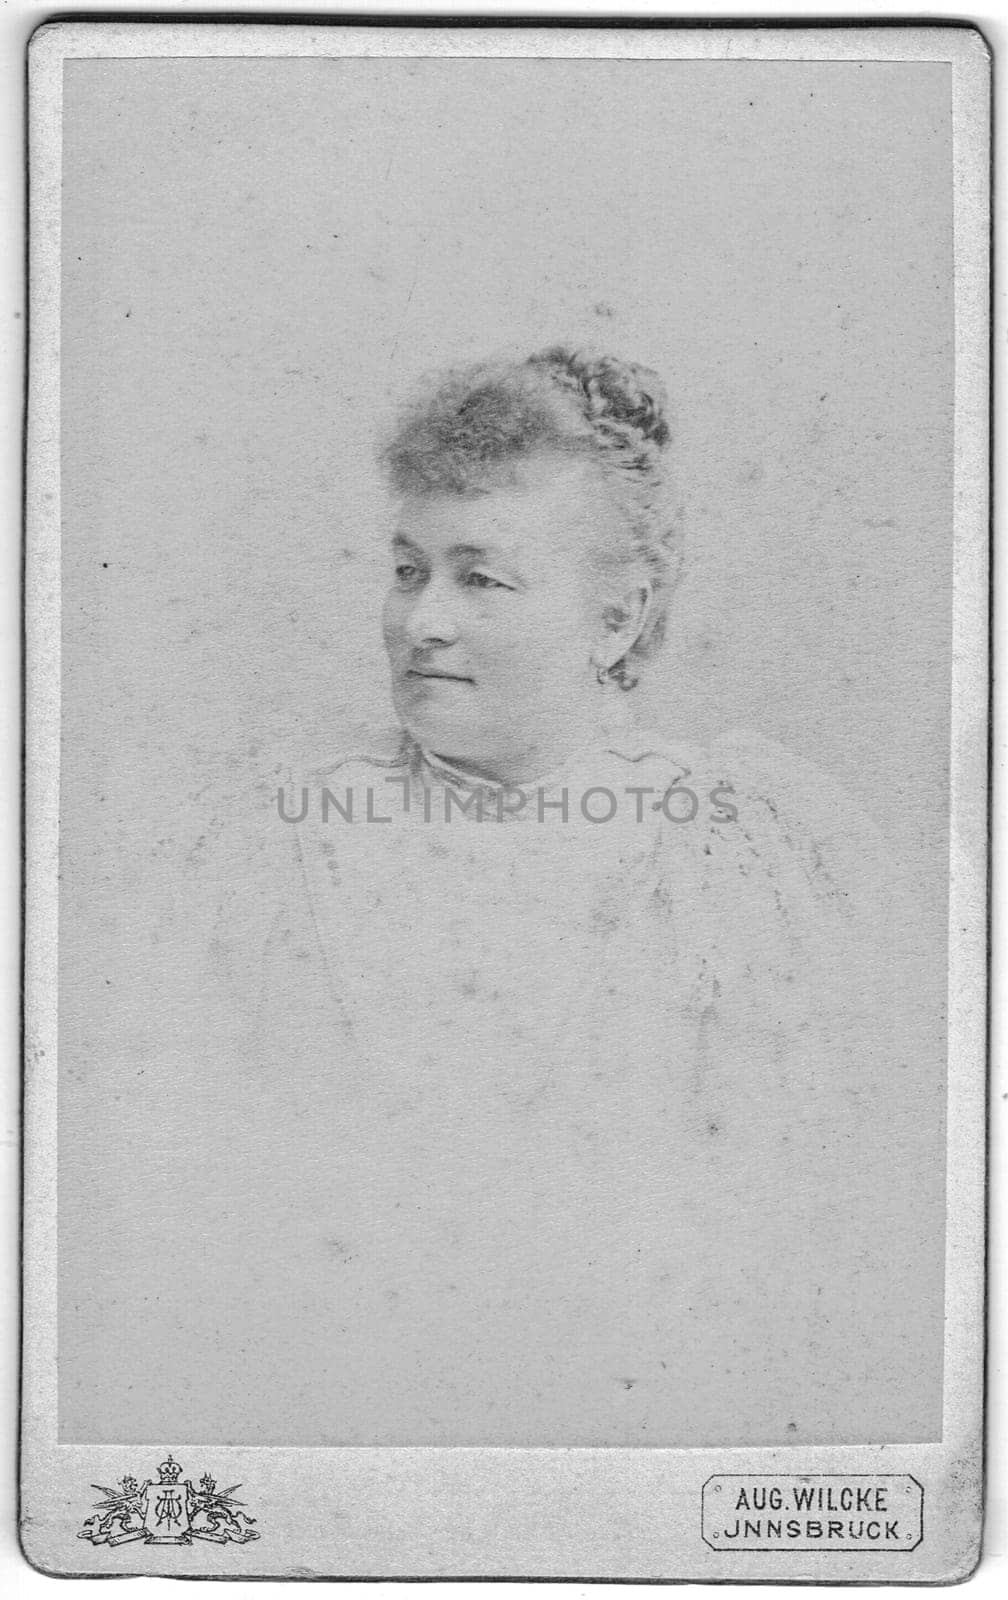 Vintage cabinet card shows portrait of older woman. Edwardian hairstyle and fashion. Photo was taken in a photo studio. Photo was taken in Austro-Hungarian Empire or also Austro-Hungarian Monarchy by roman_nerud